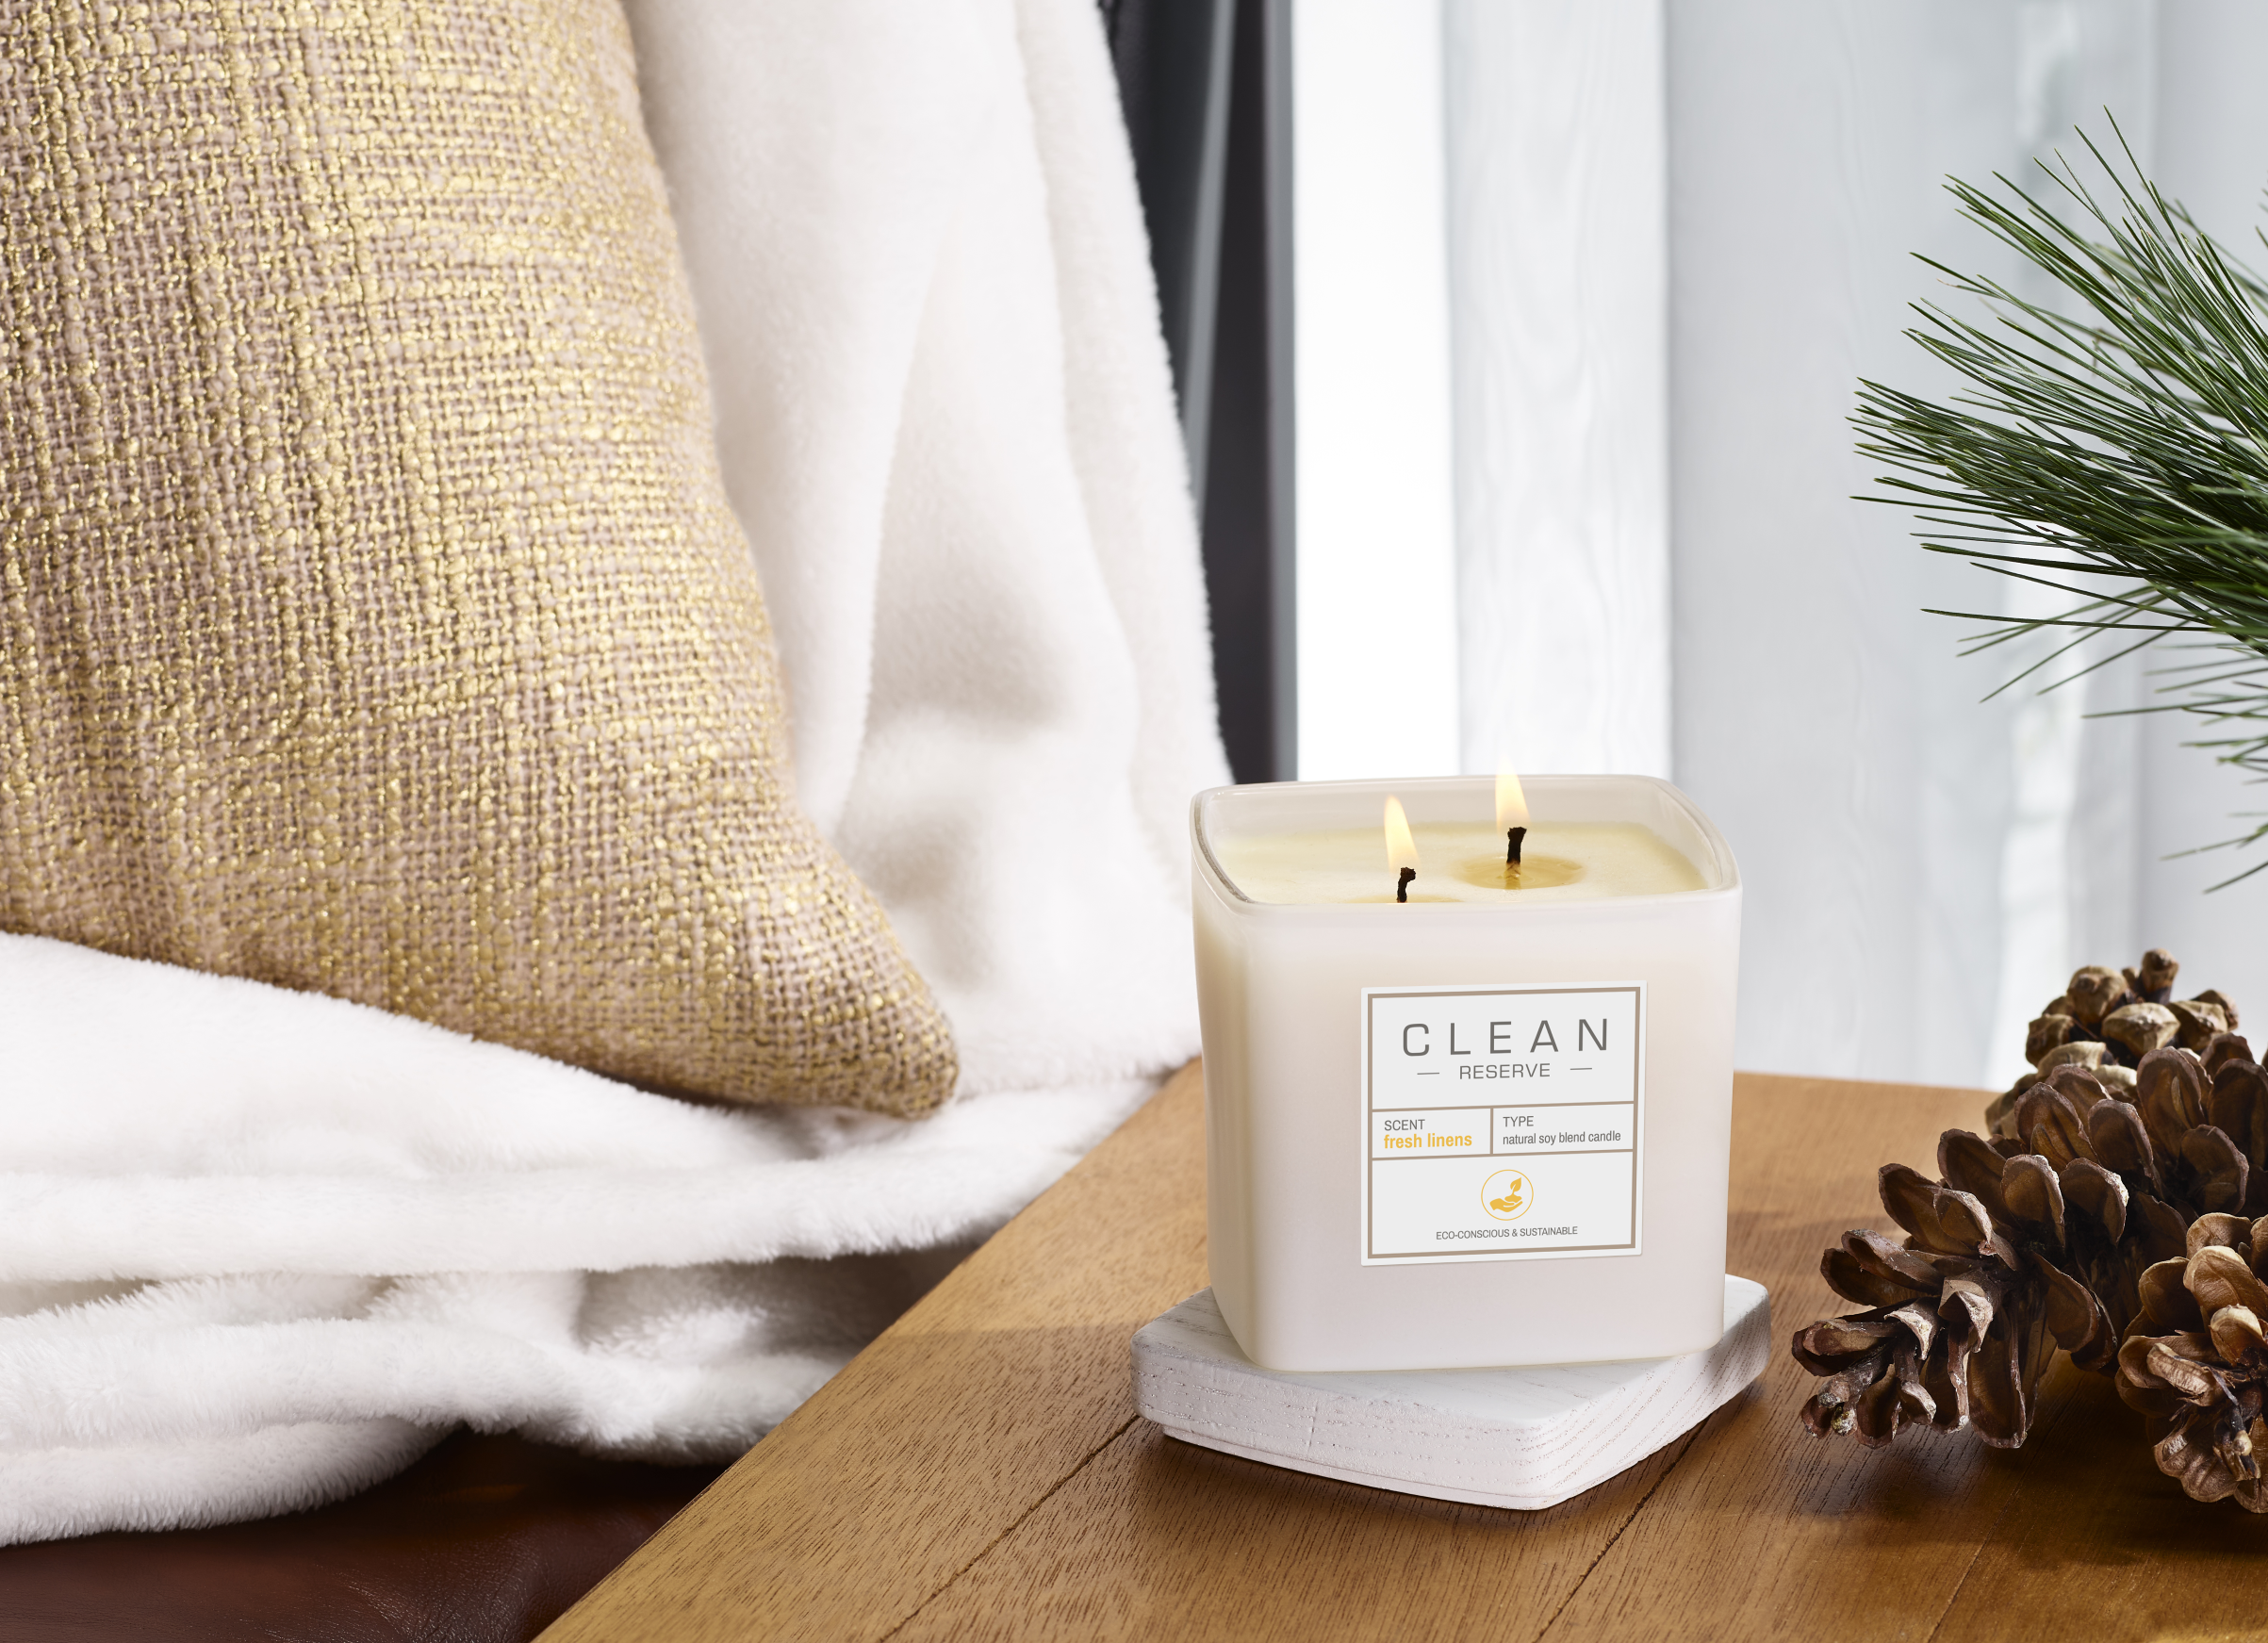 Clean reserve candle in fresh linens on bedside table